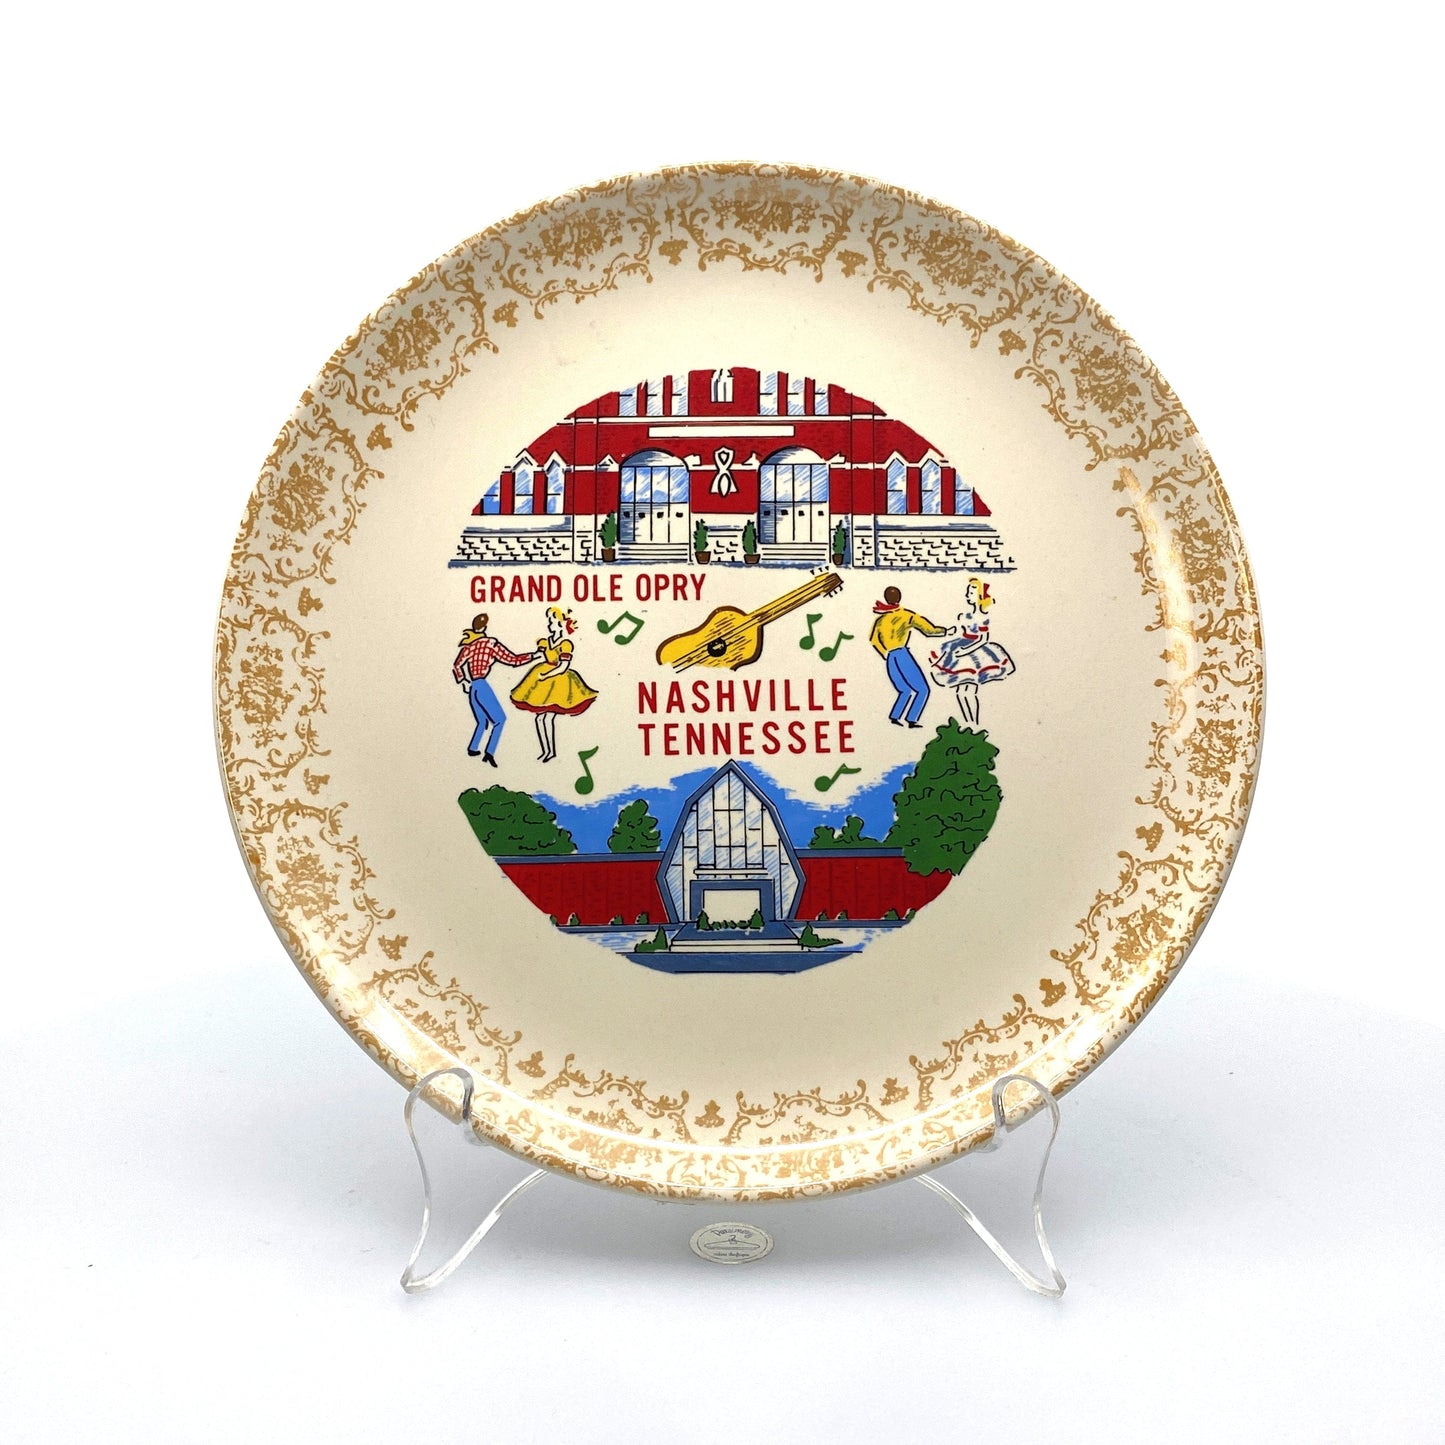 Grand Ole Opry Nashville Tennessee Porcelain Travel Souvenir Collectible Plate 9”